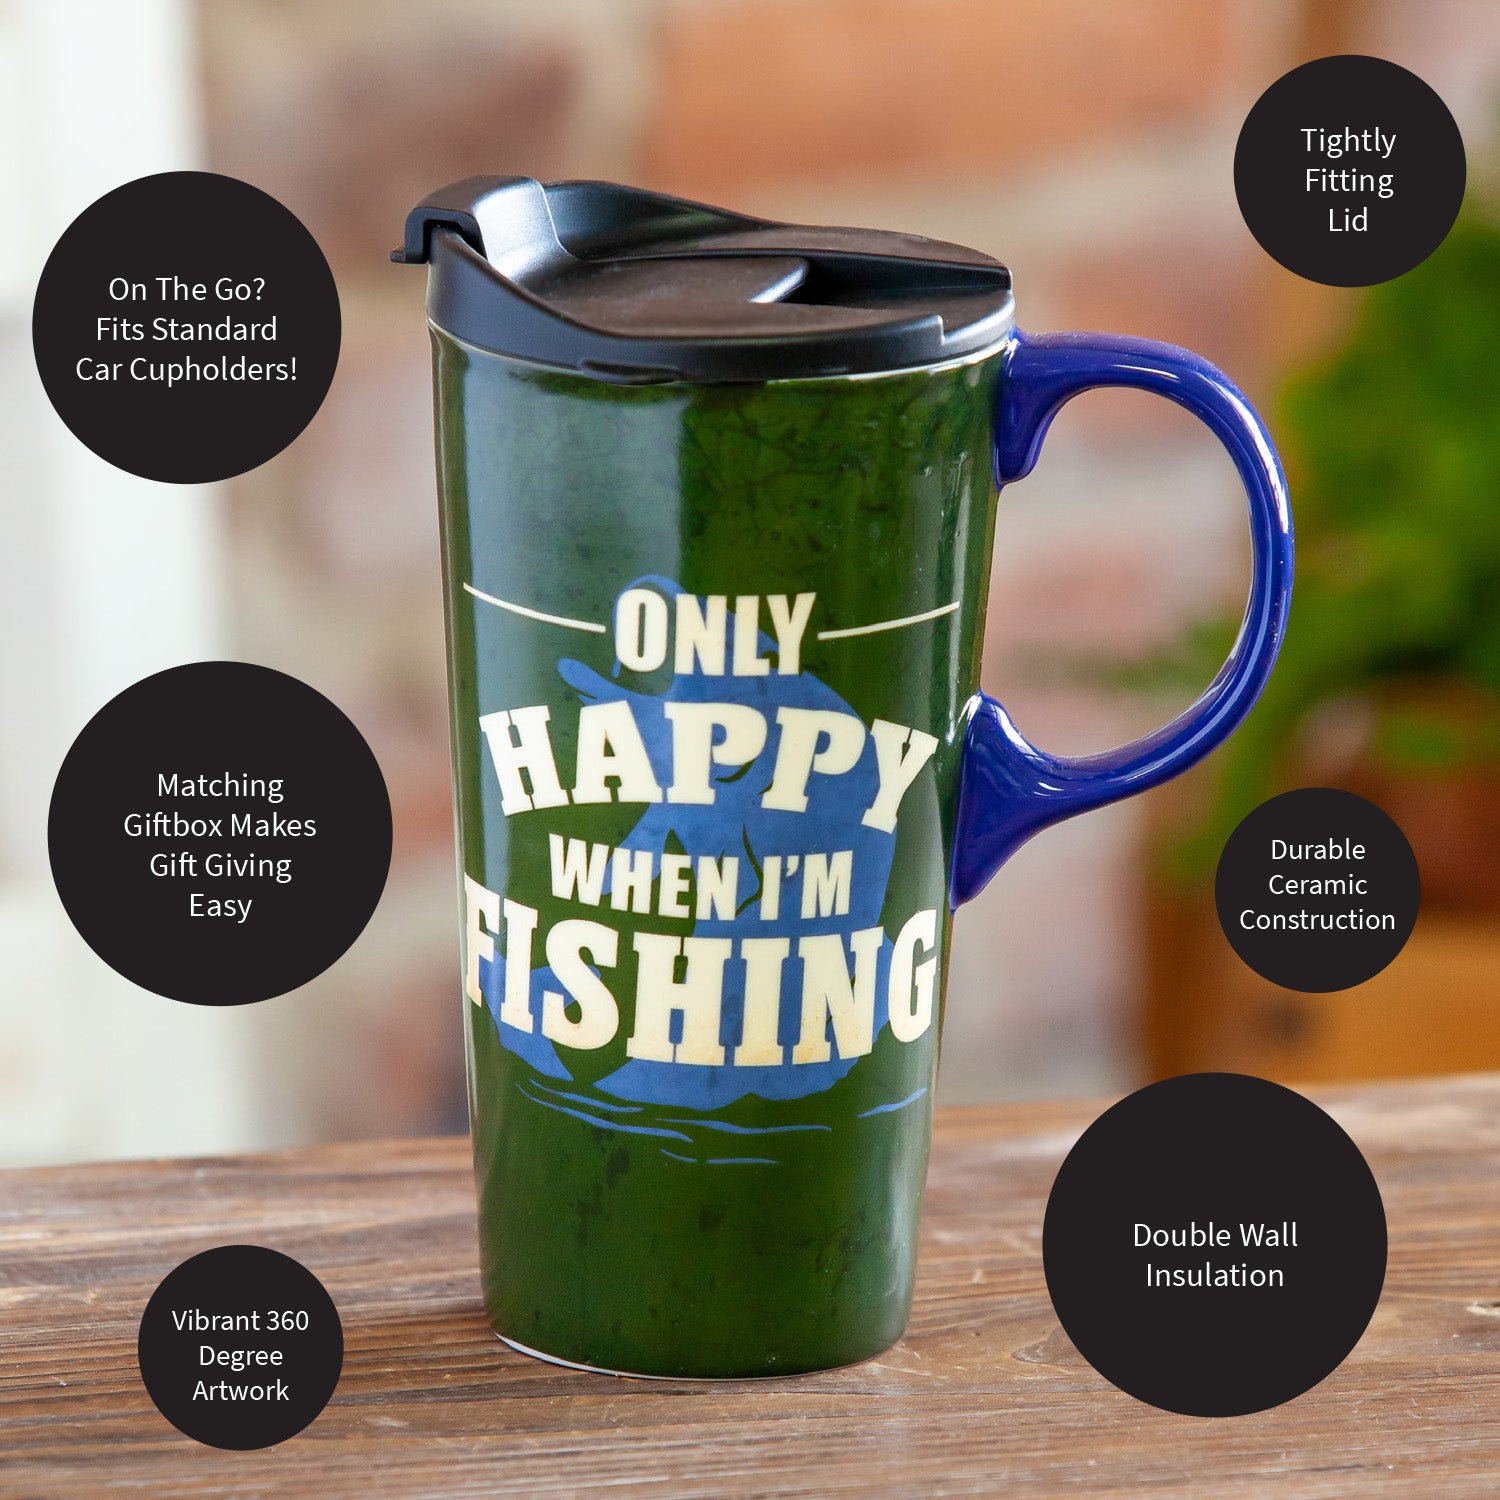 Only Happy When I'm Fishing 17 oz. Ceramic Travel Cup with box